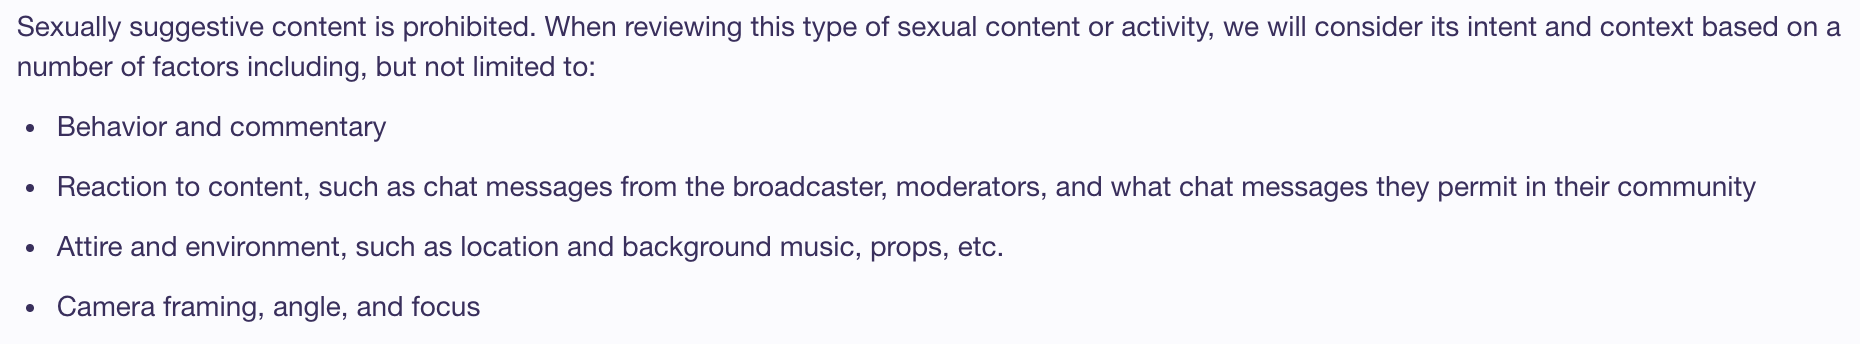 Twitch Community Guidelines